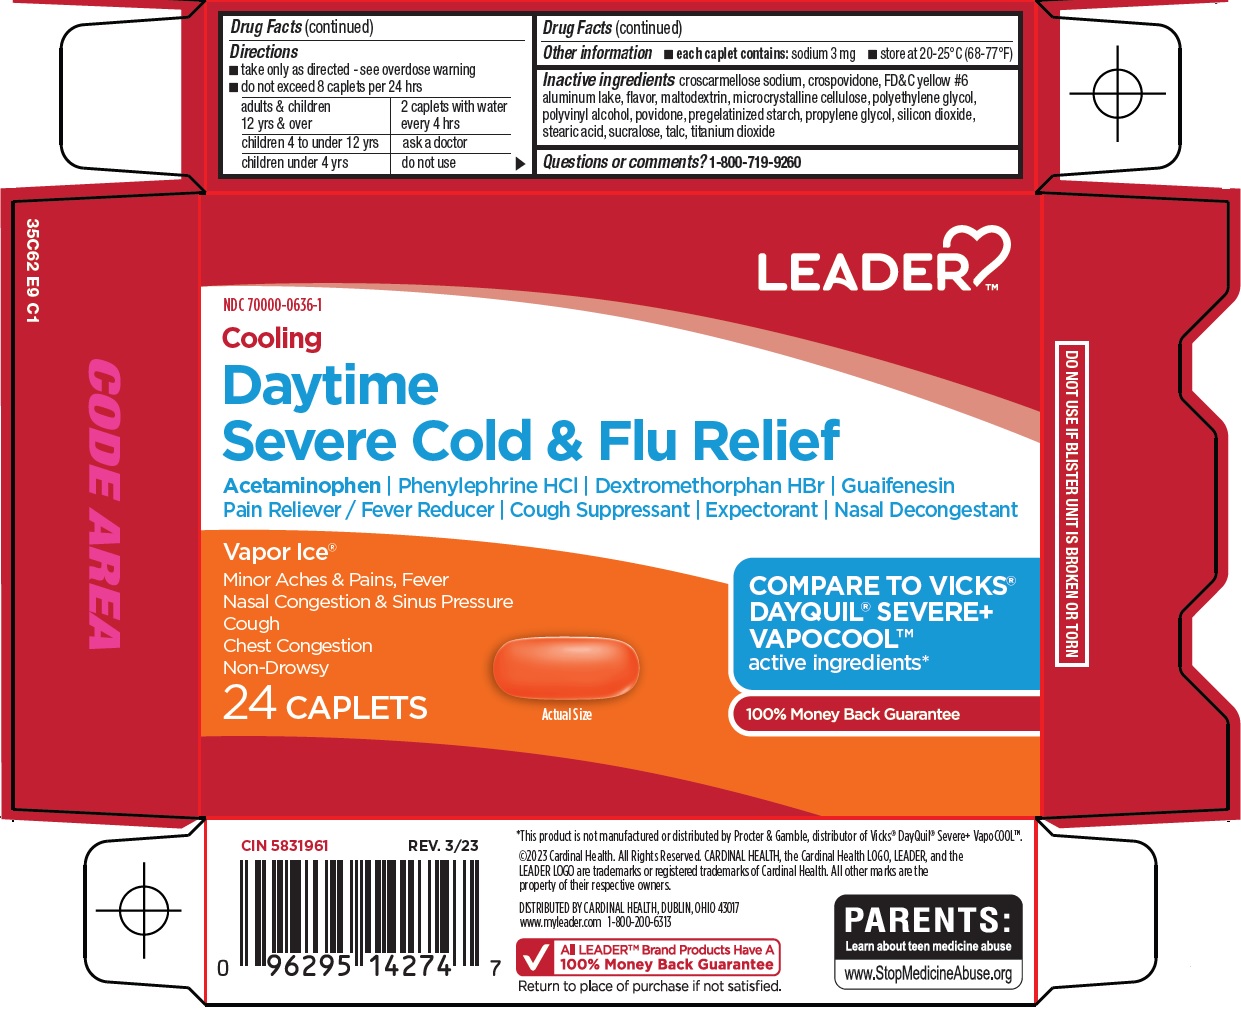 Daytime Severe Cold & Flu Relief Carton Image 1